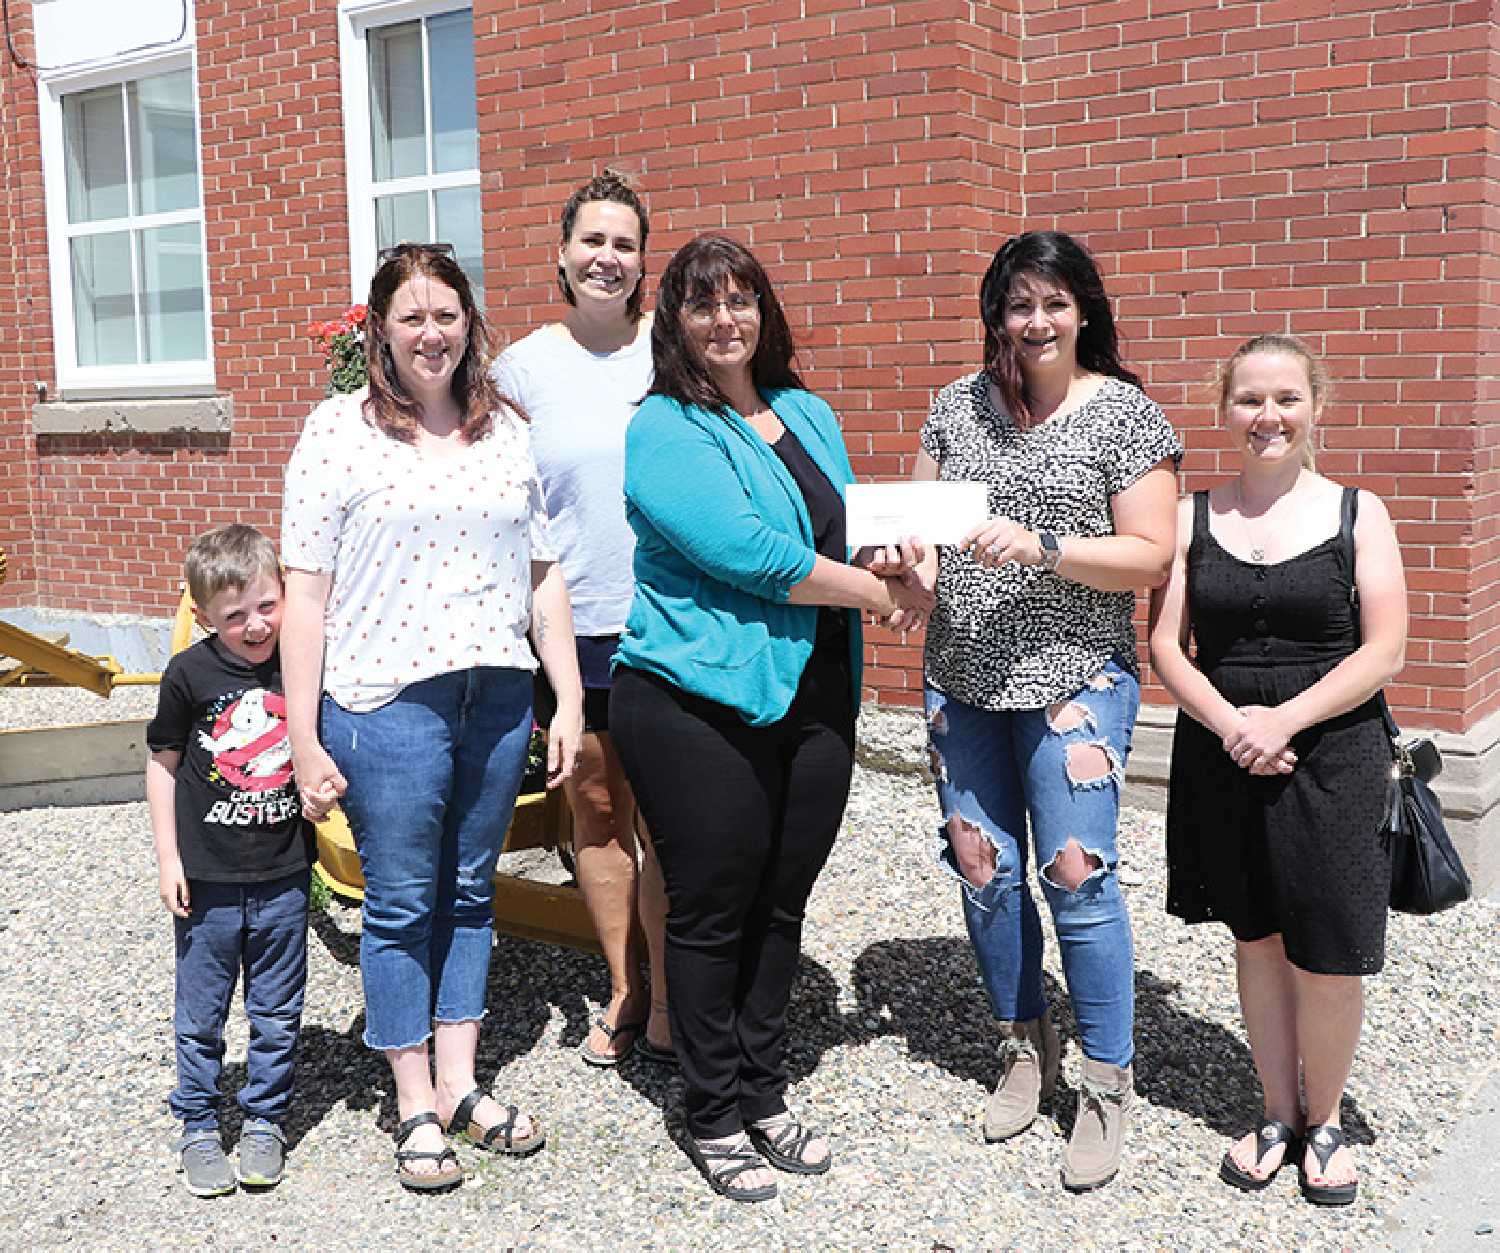 The RM of Moosomin donated $10,000 to the Eastside Playground Committee in support of their project for building a park and playground at 310 Henry Street in Moosomin.  Left are, Chelsea Doane, her son Preston and Andrea Chambers of the Eastside Playground Committee, (middle) CAO of the RM of Moosomin Kendra Lawrence, Andie Hodgson and Dana Jones of the Eastside Playground Committee.